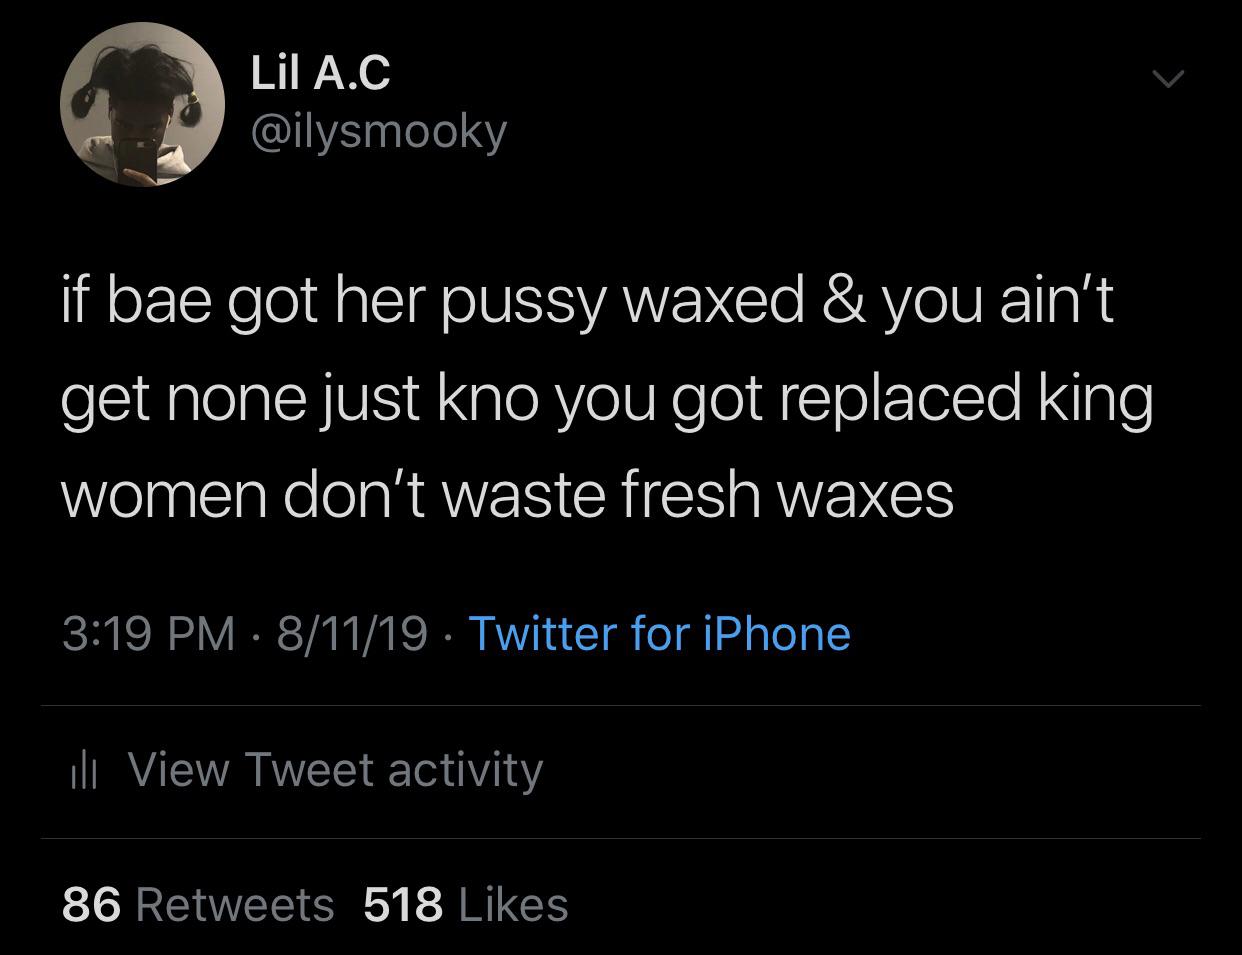 Lil A.C if bae got her pussy waxed & you ain't get none just kno you got replaced king women don't waste fresh waxes 81119 . Twitter for iPhone ili View Tweet activity 86 518